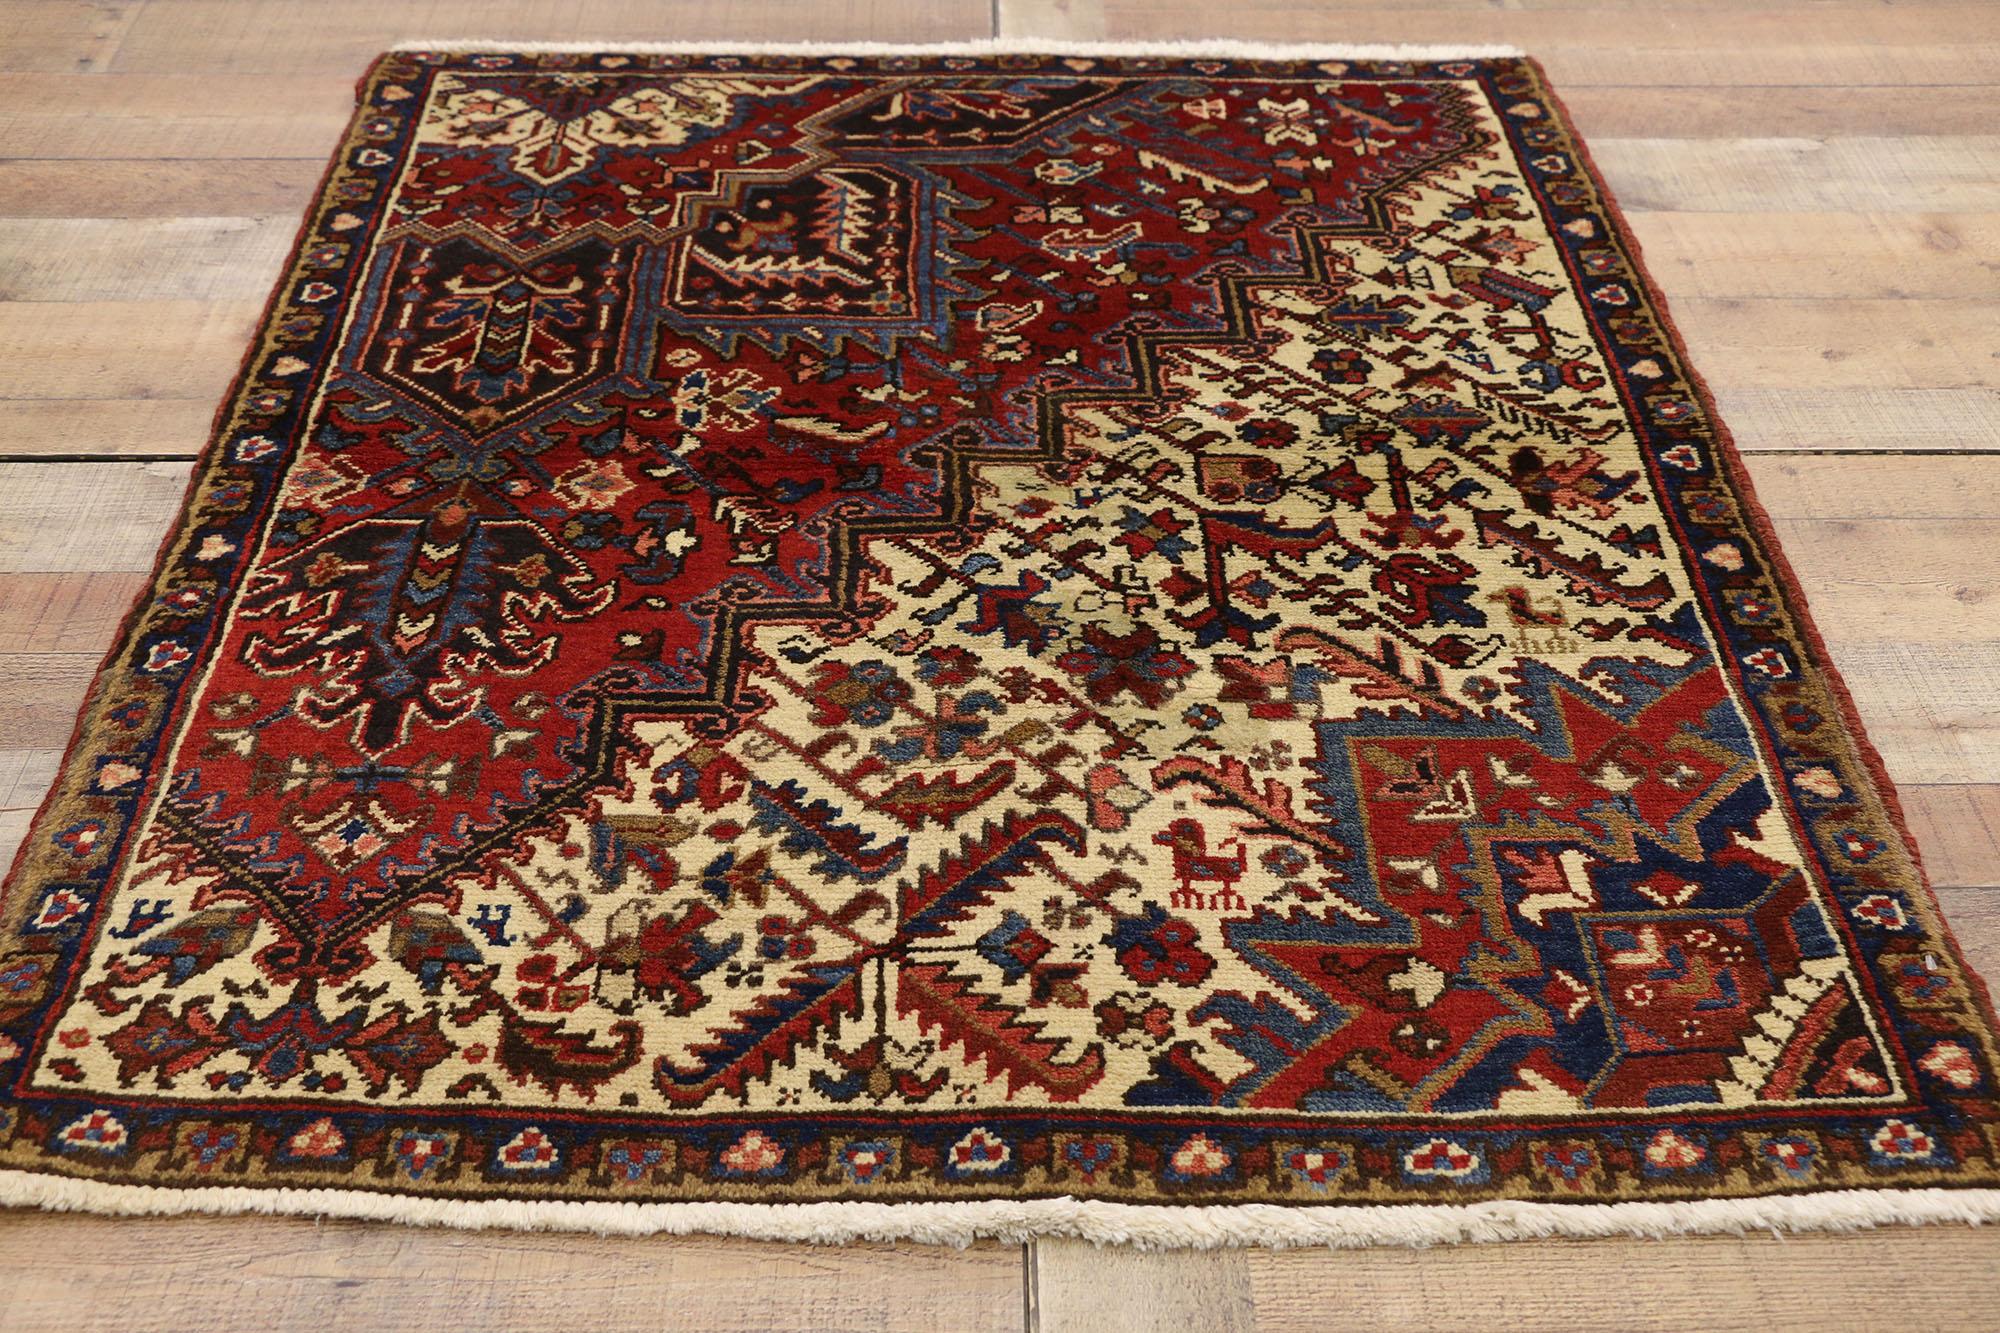 Iraqi Vintage Persian Heriz Rug with Traditional Modern Style, Wagireh Rug For Sale